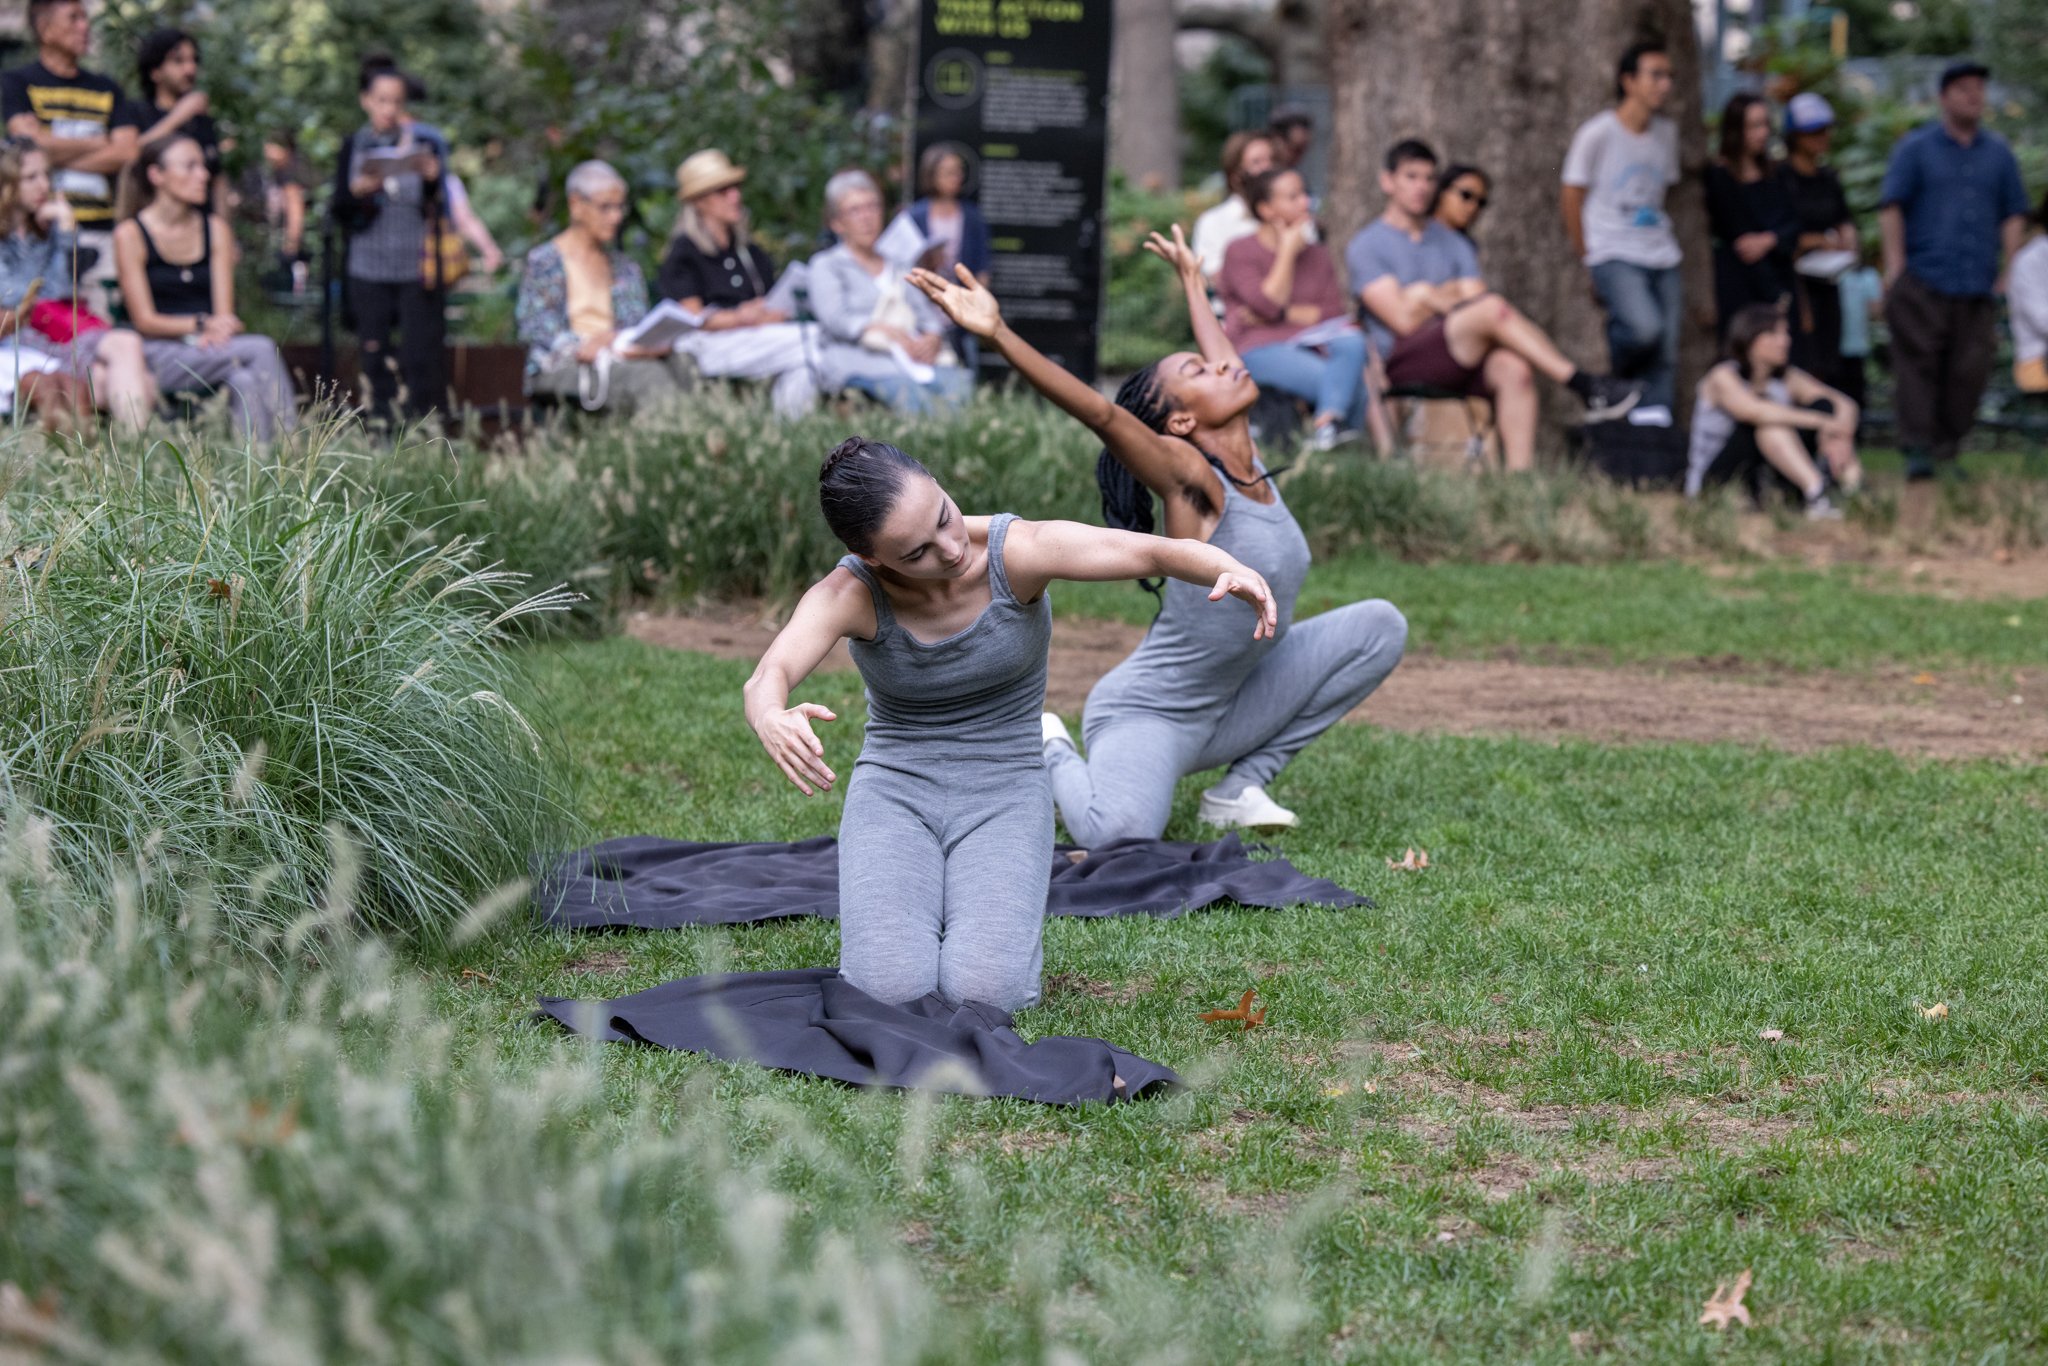  Cara McManus &amp; Bria Bacon in Beau Bree Rhee, Shadow of the Sea, 2022. Performance view, Madison Square Park, September 21, 2022. Presented by The Kitchen in partnership with Madison Square Park Conservancy. Artwork pictured: Cristina Iglesias (S